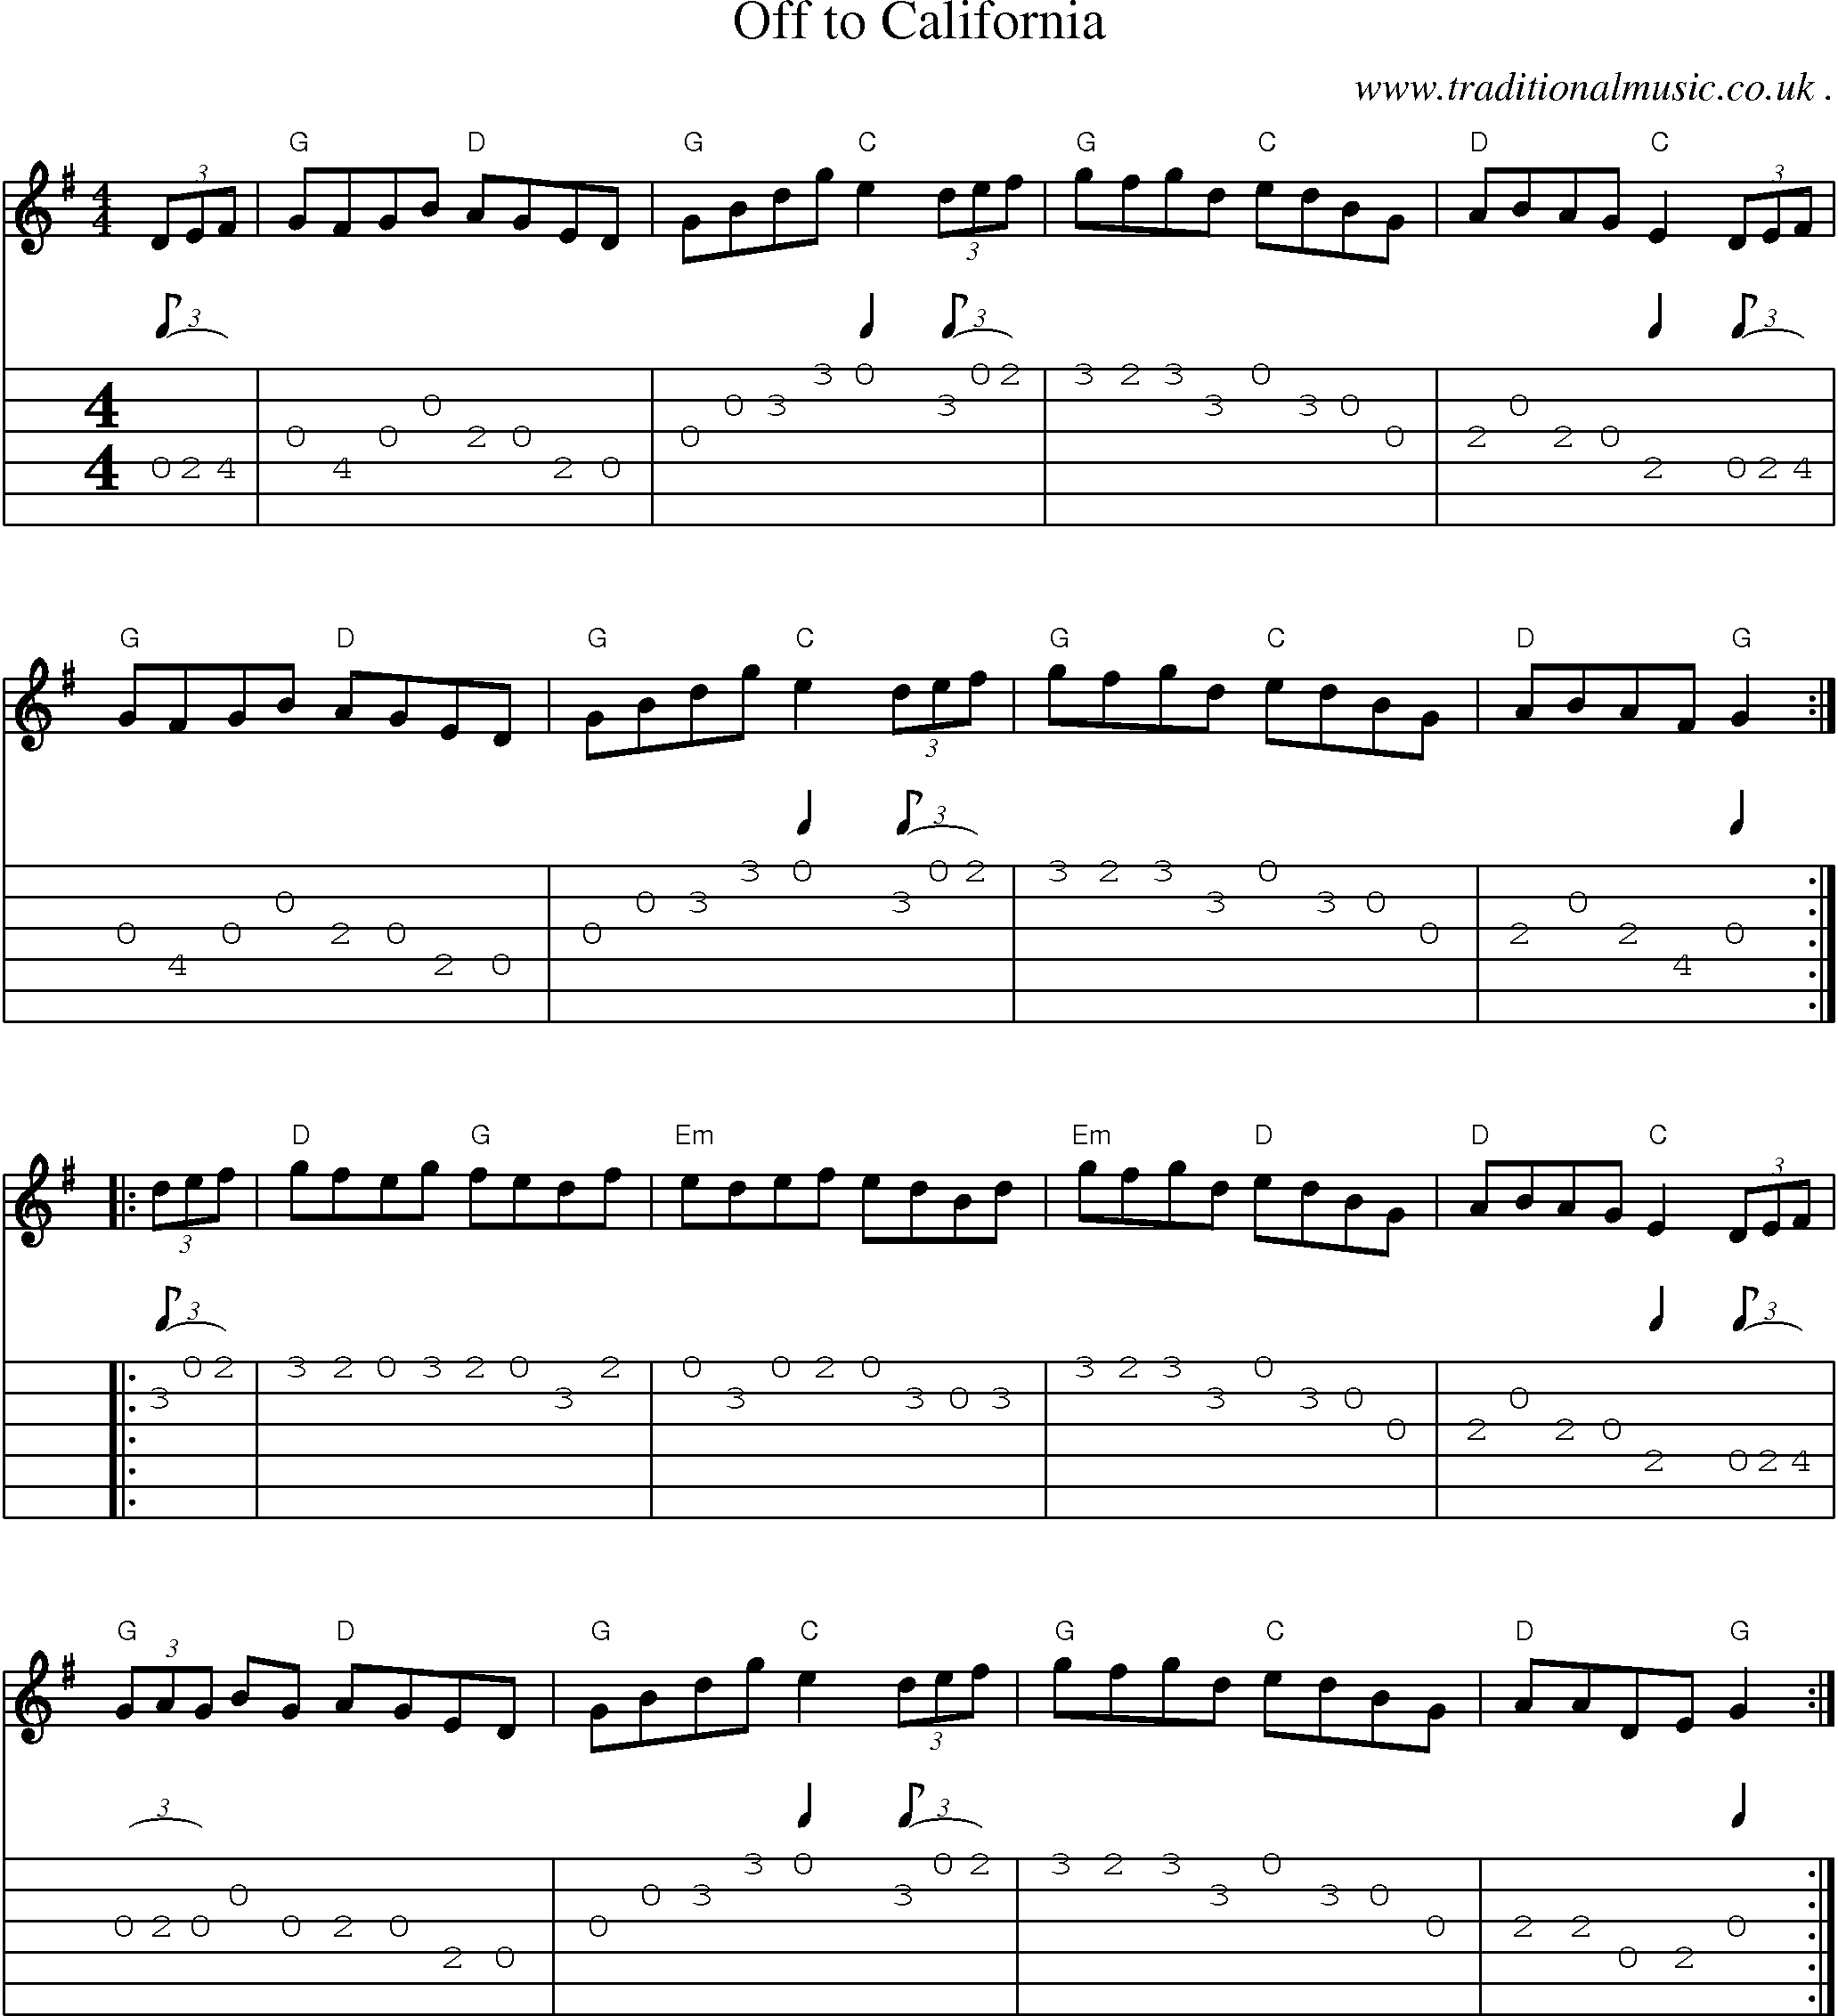 Music Score and Guitar Tabs for Off To California